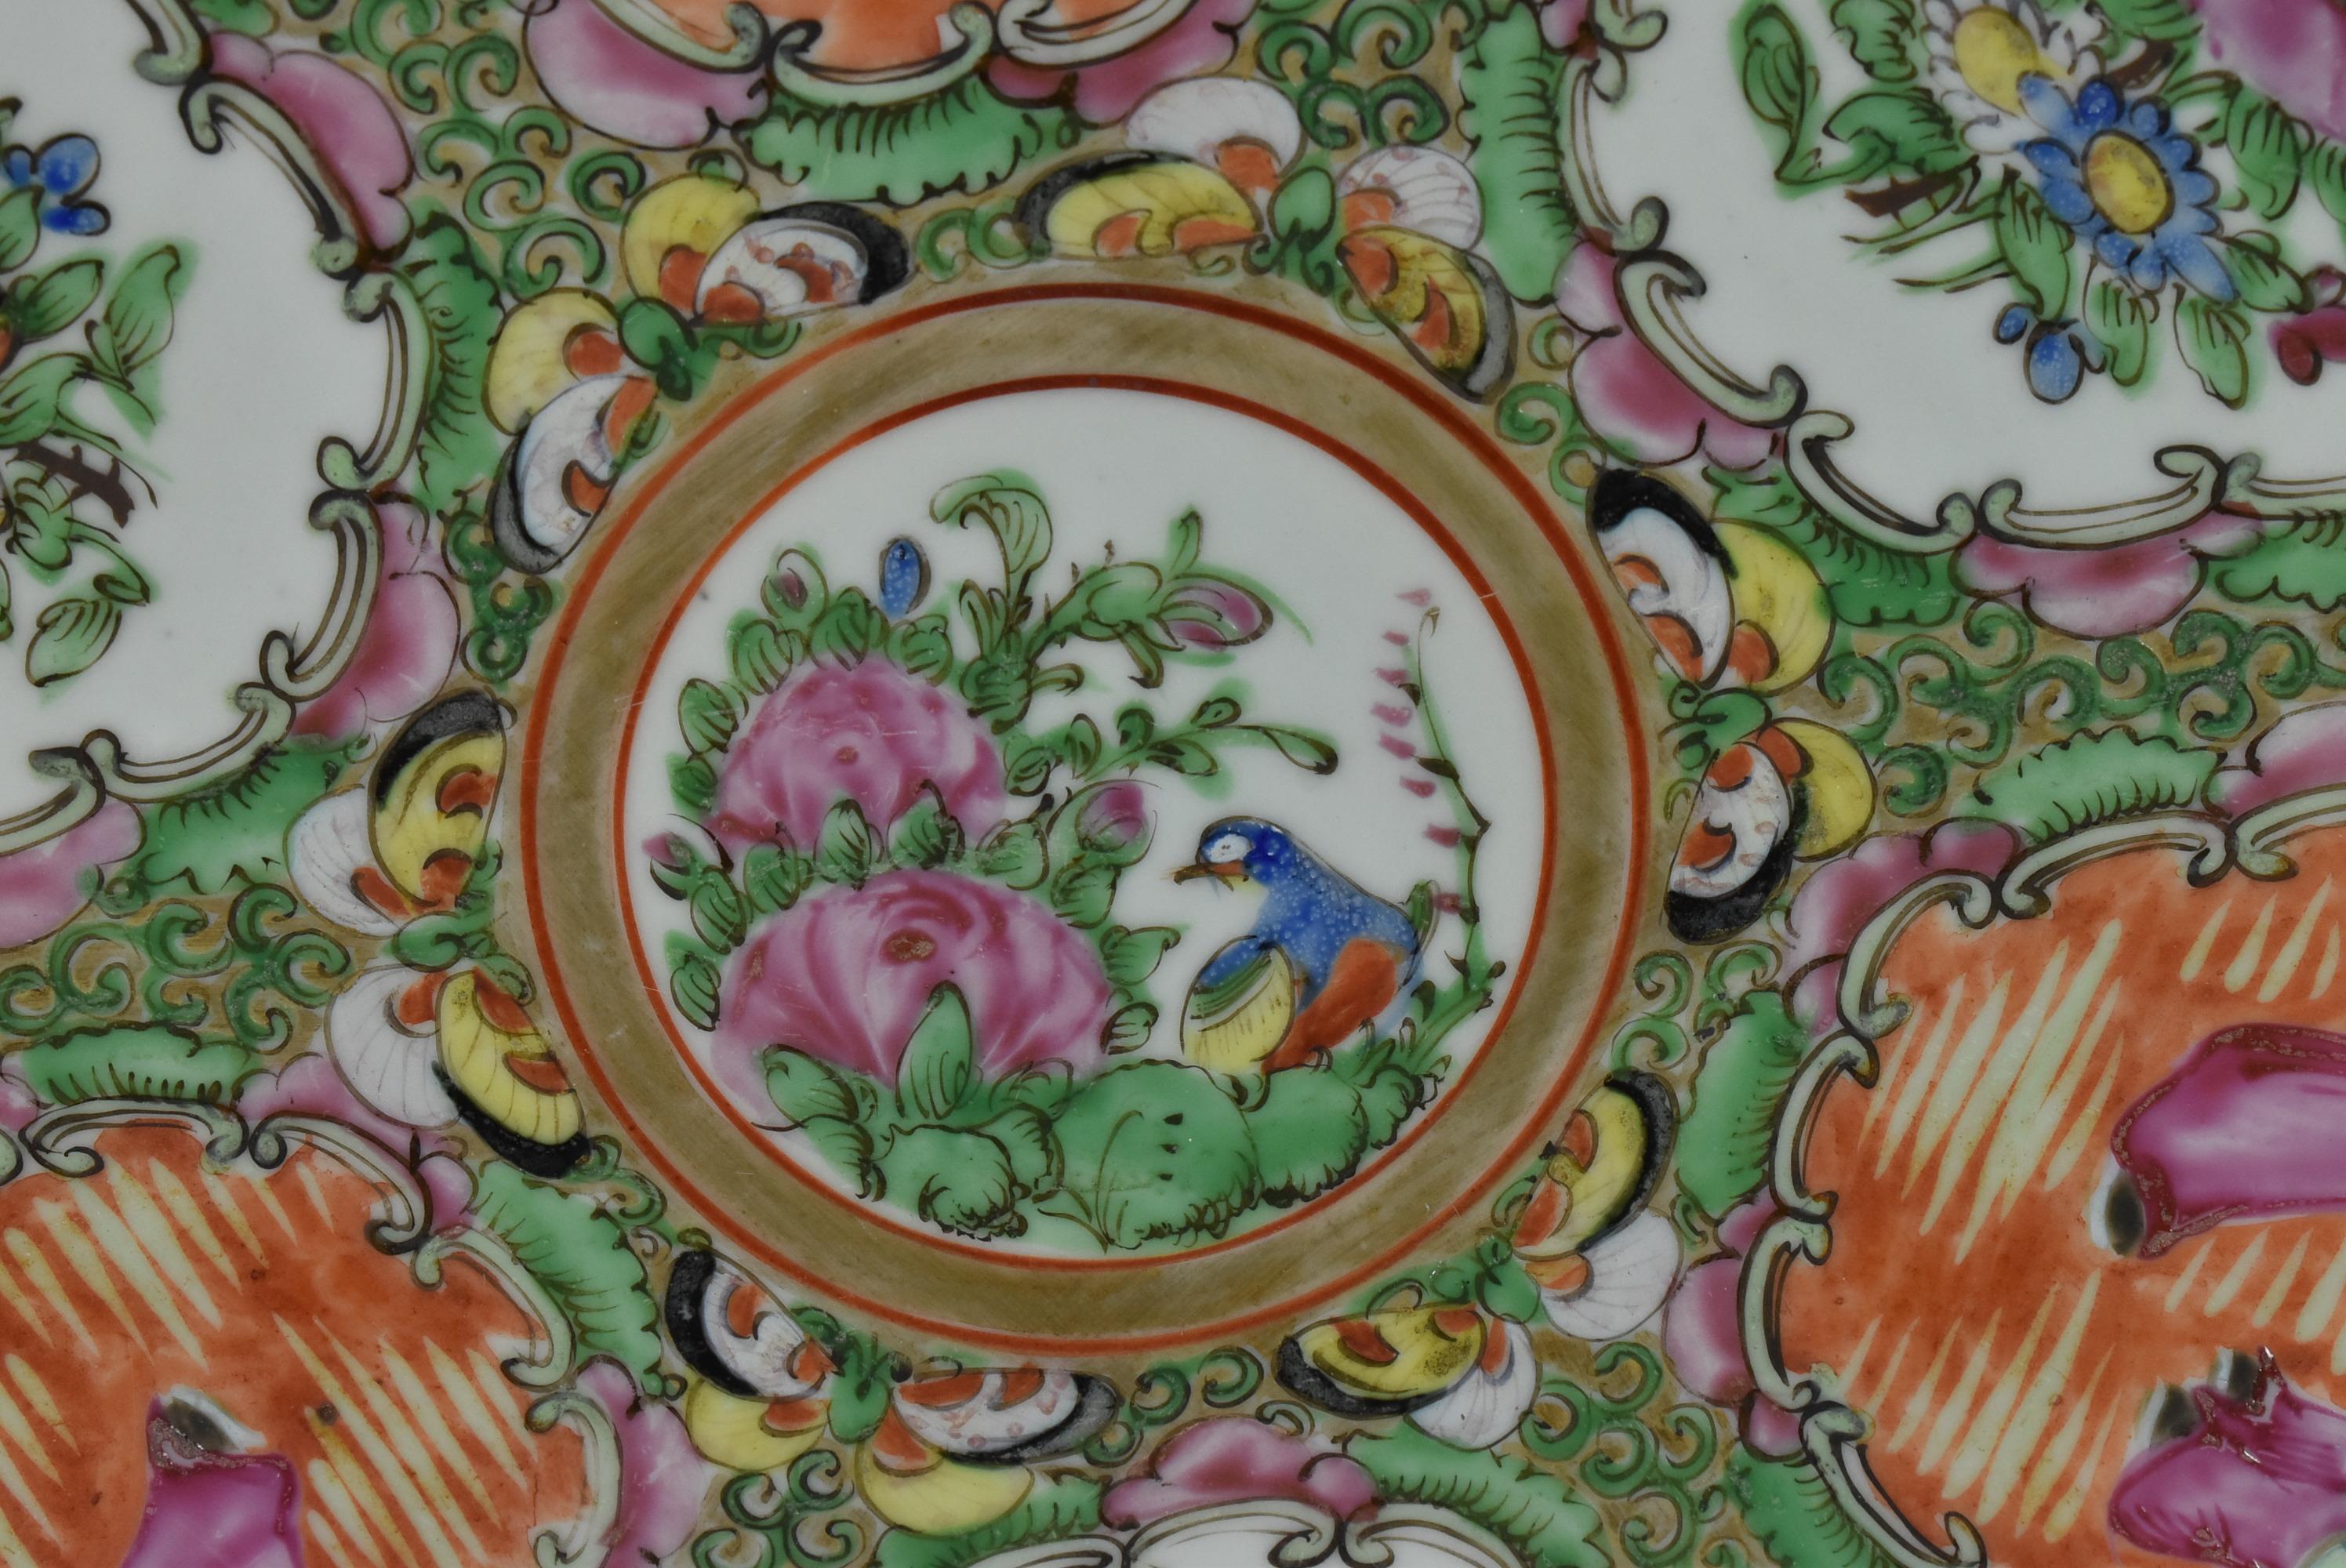 Hand painted Famille rose porcelain Chinese charger. Six panels of painted figures, birds, butterflies and flowers. Very good condition with no damage. Dimensions: 16